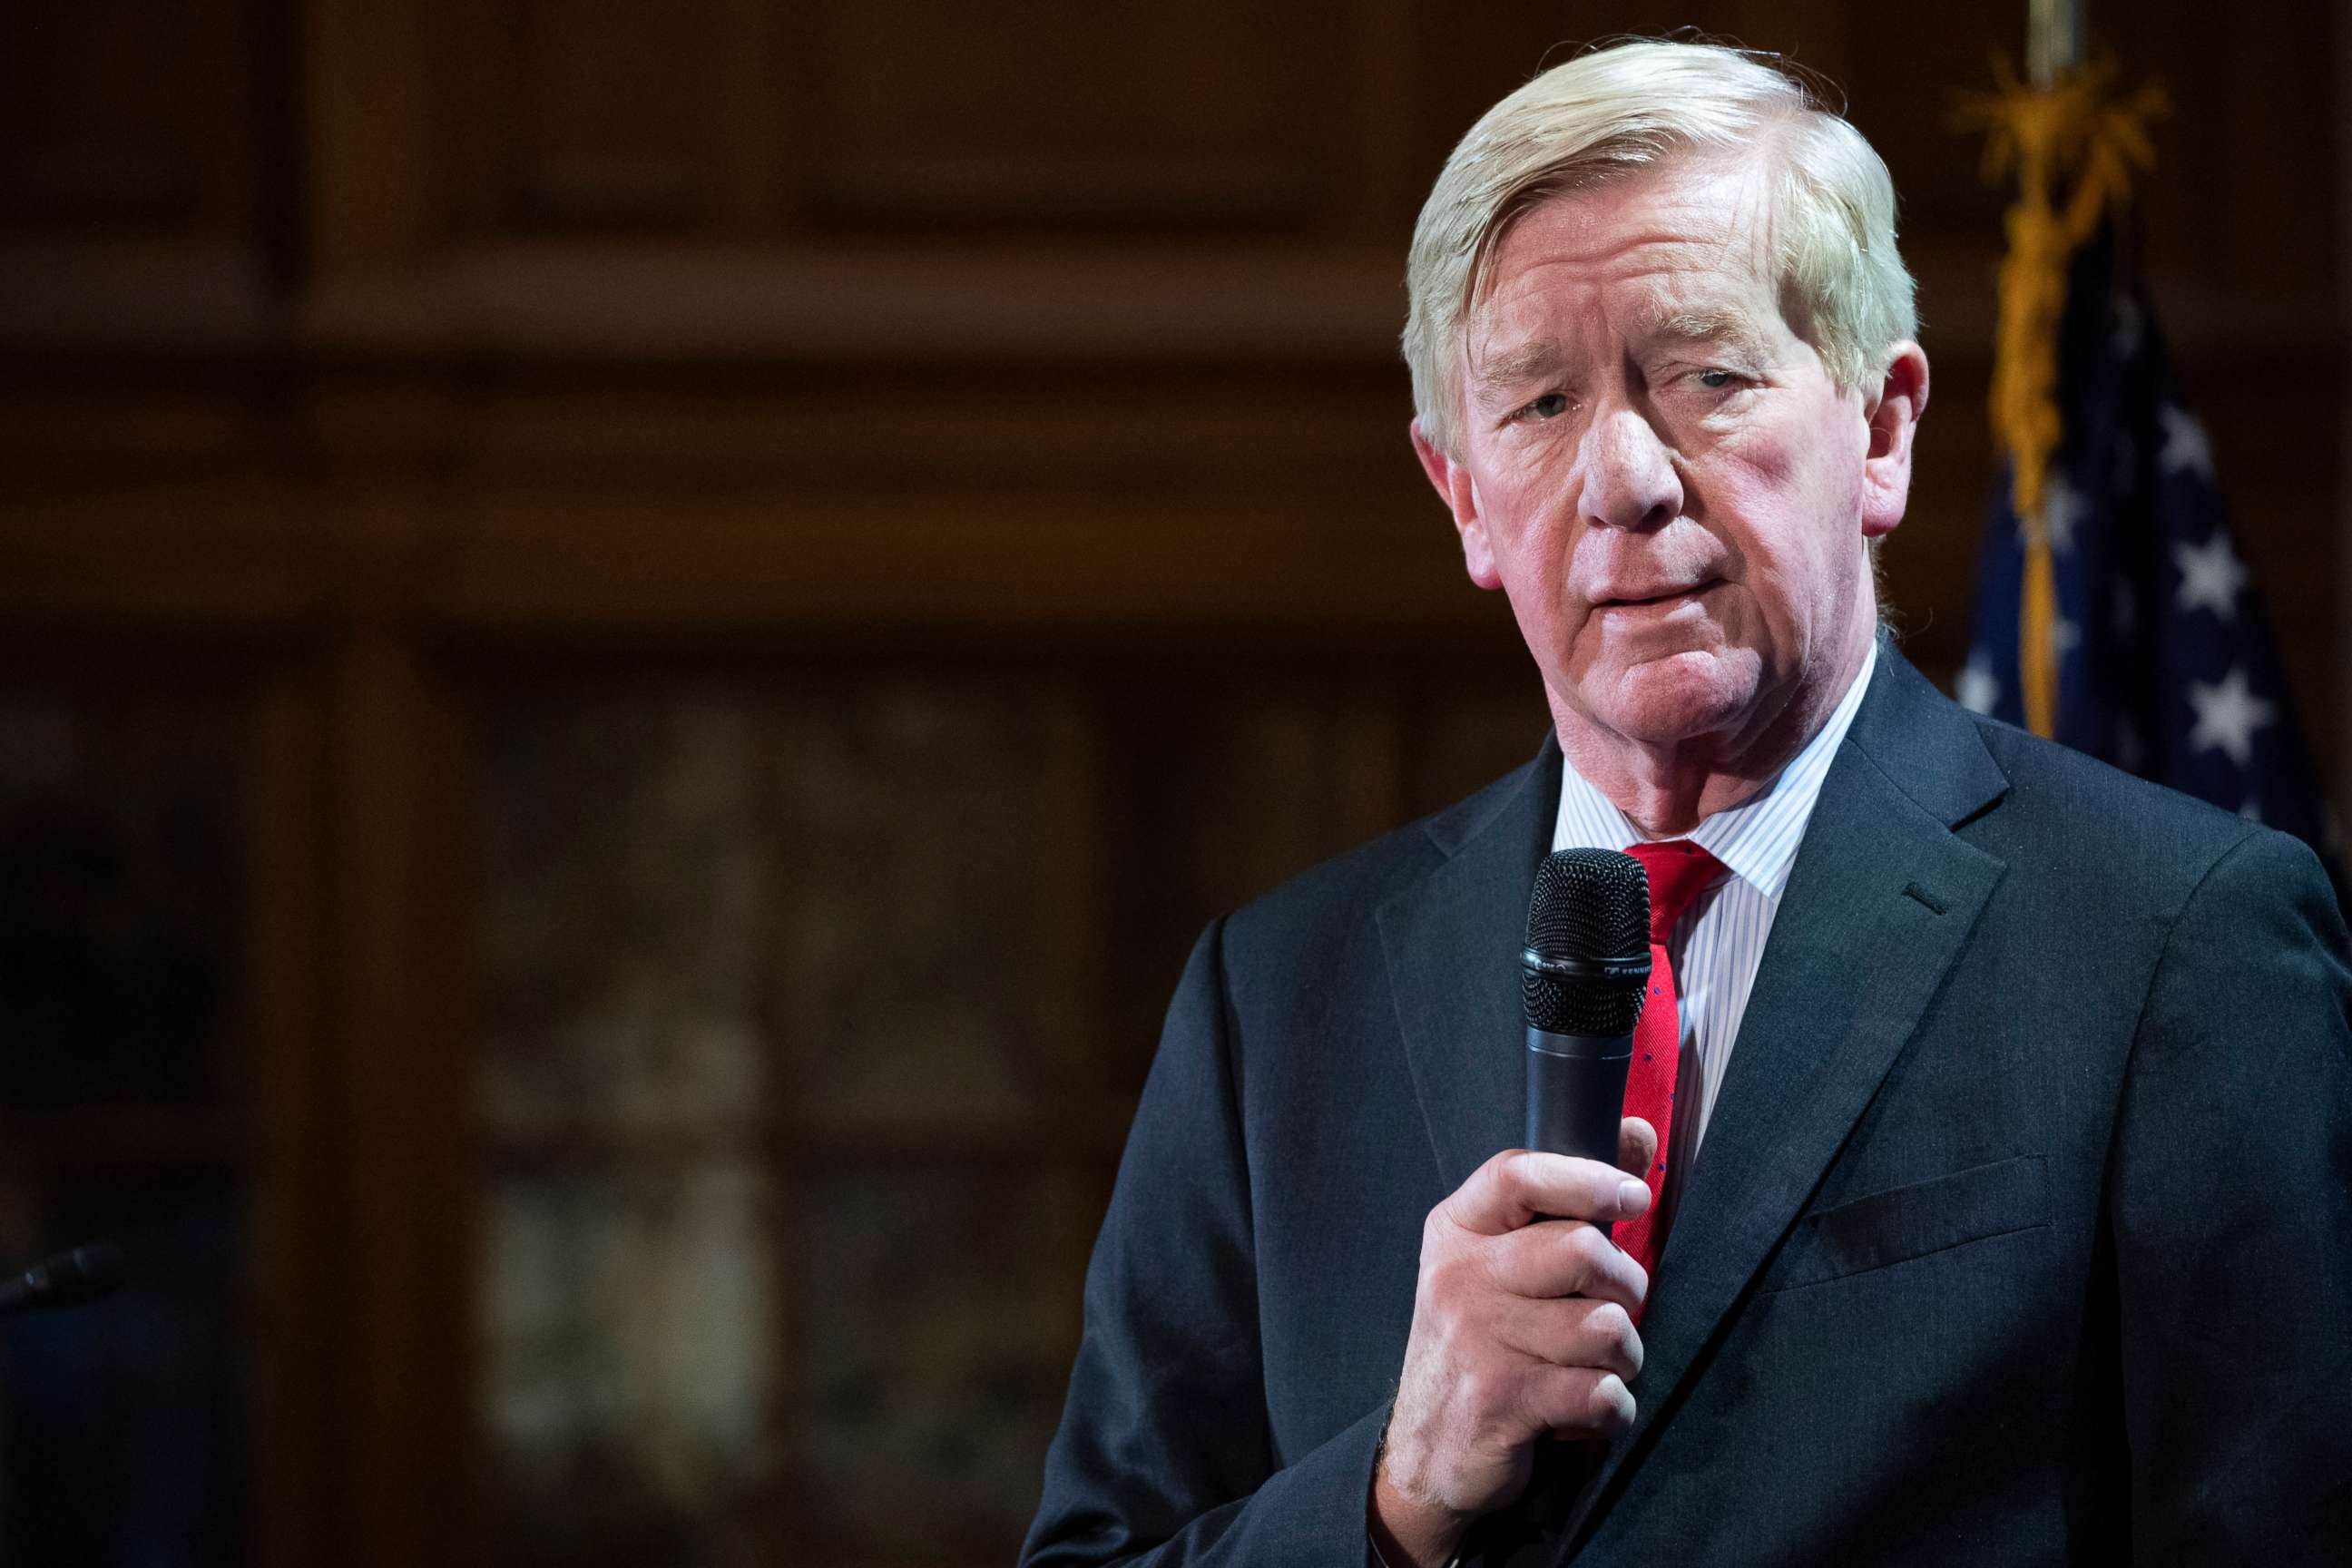 PHOTO: Republican presidential candidate former Massachusetts Gov. Bill Weld speaks during the Higher Education Forum "College Costs & Debt in the 2020 Elections," Feb. 6, 2020, at the University of New Hampshire in Concord, N.H.